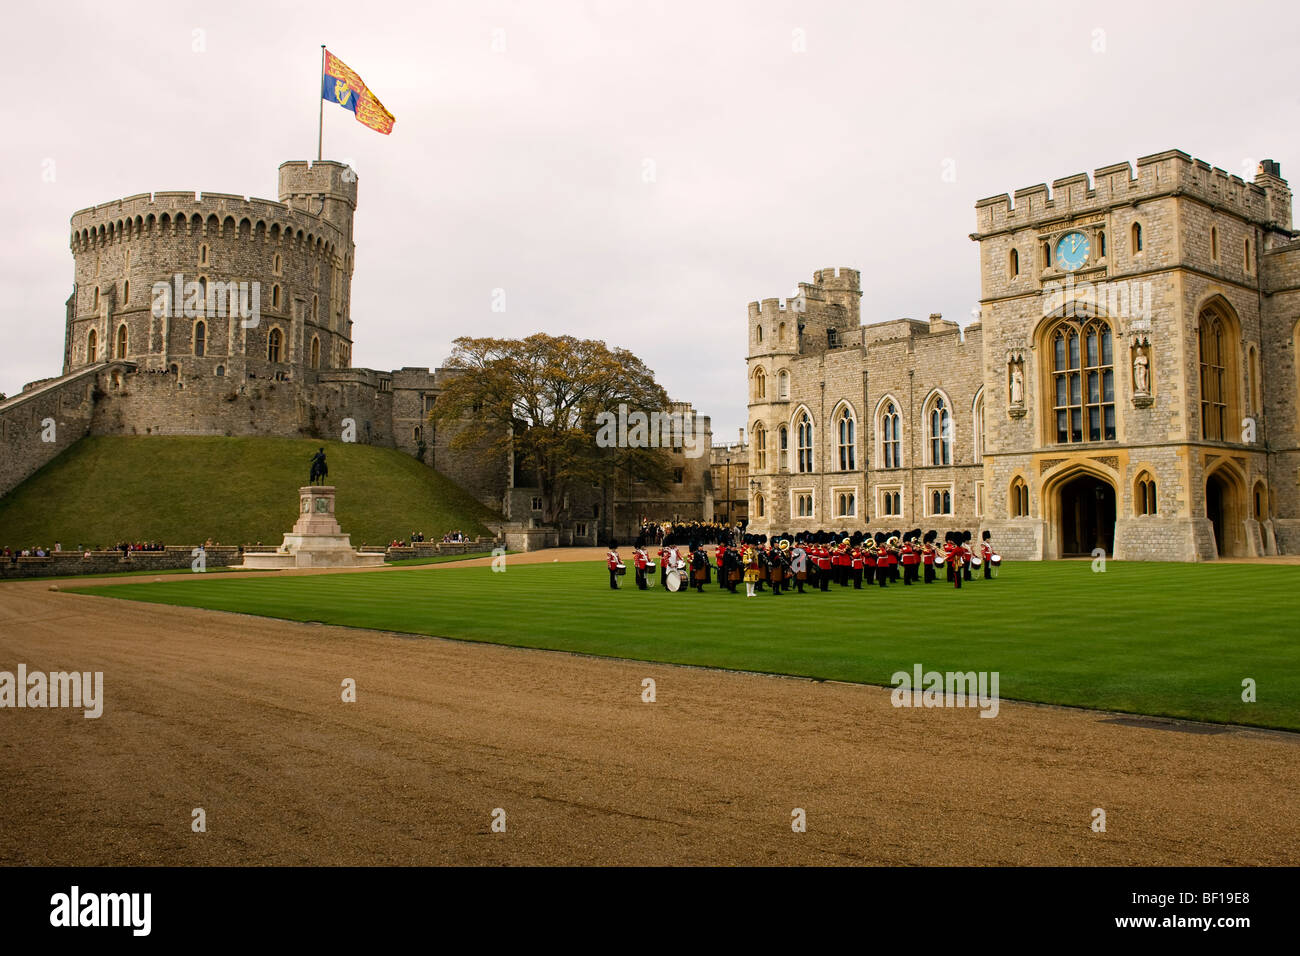 The military band of the Irish Guards on parade in the Quadrangle inside Windsor Castle in England Stock Photo